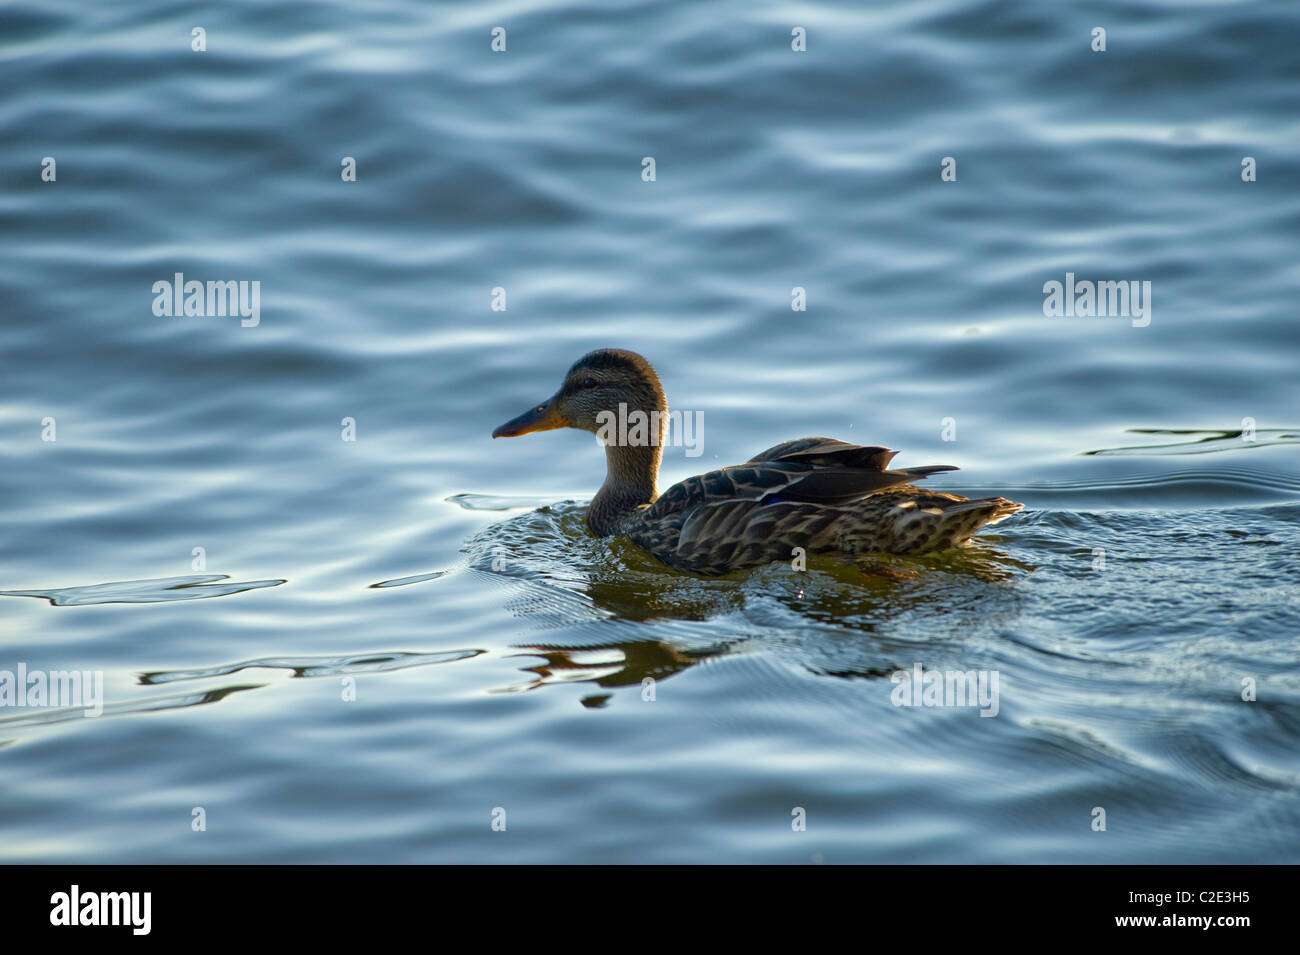 Lake Of The Woods, Ontario, Canada; Duck Swimming In Lake Stock Photo